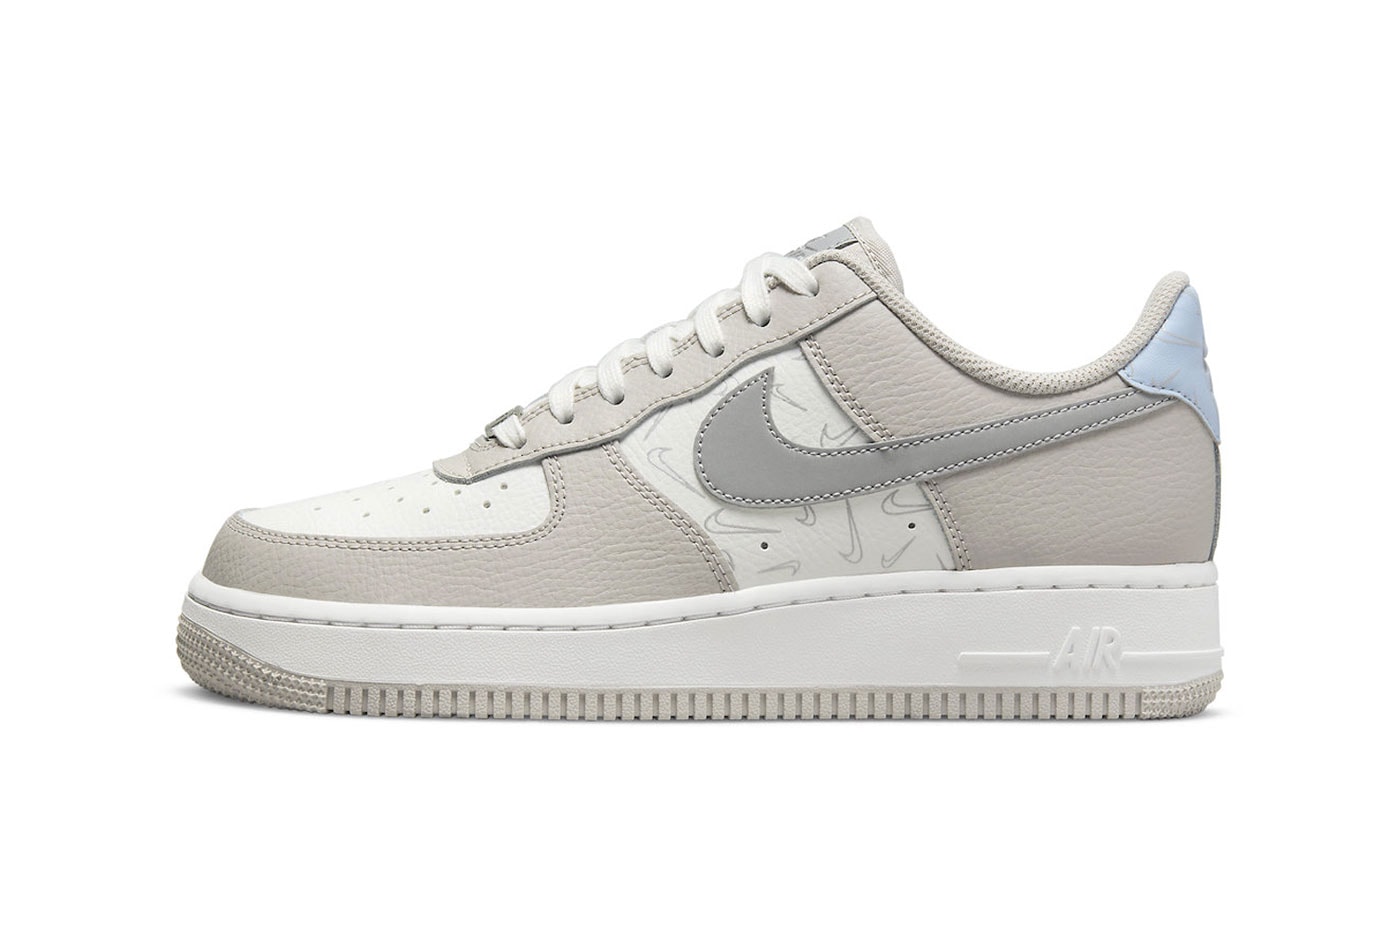 Reflective swoosh: Nike Air Force 1 Low Reflective Swoosh shoes